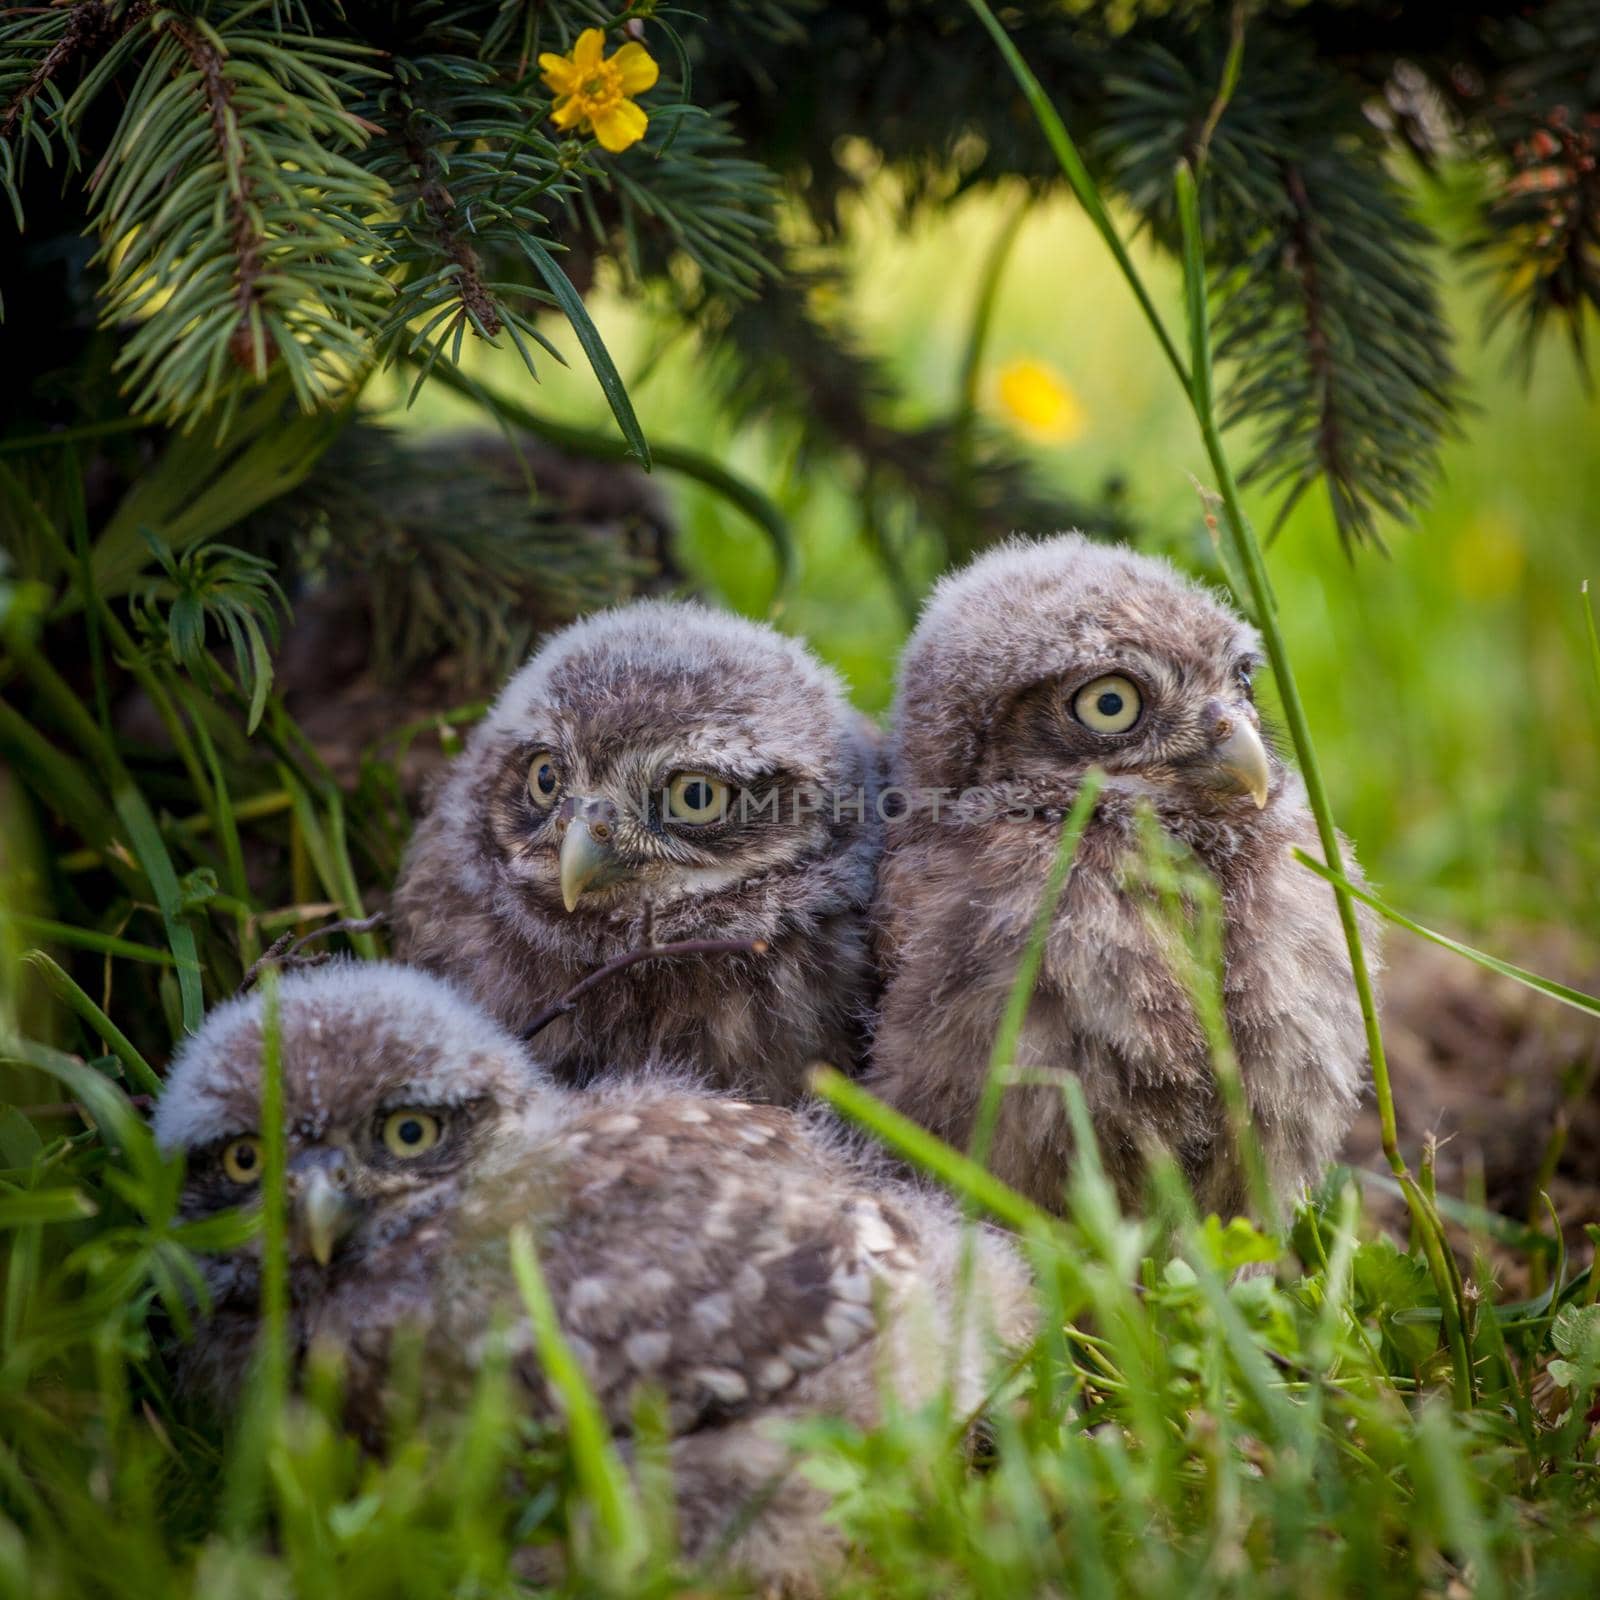 Little Owl Babies, 5 weeks old, Athene noctua on grass